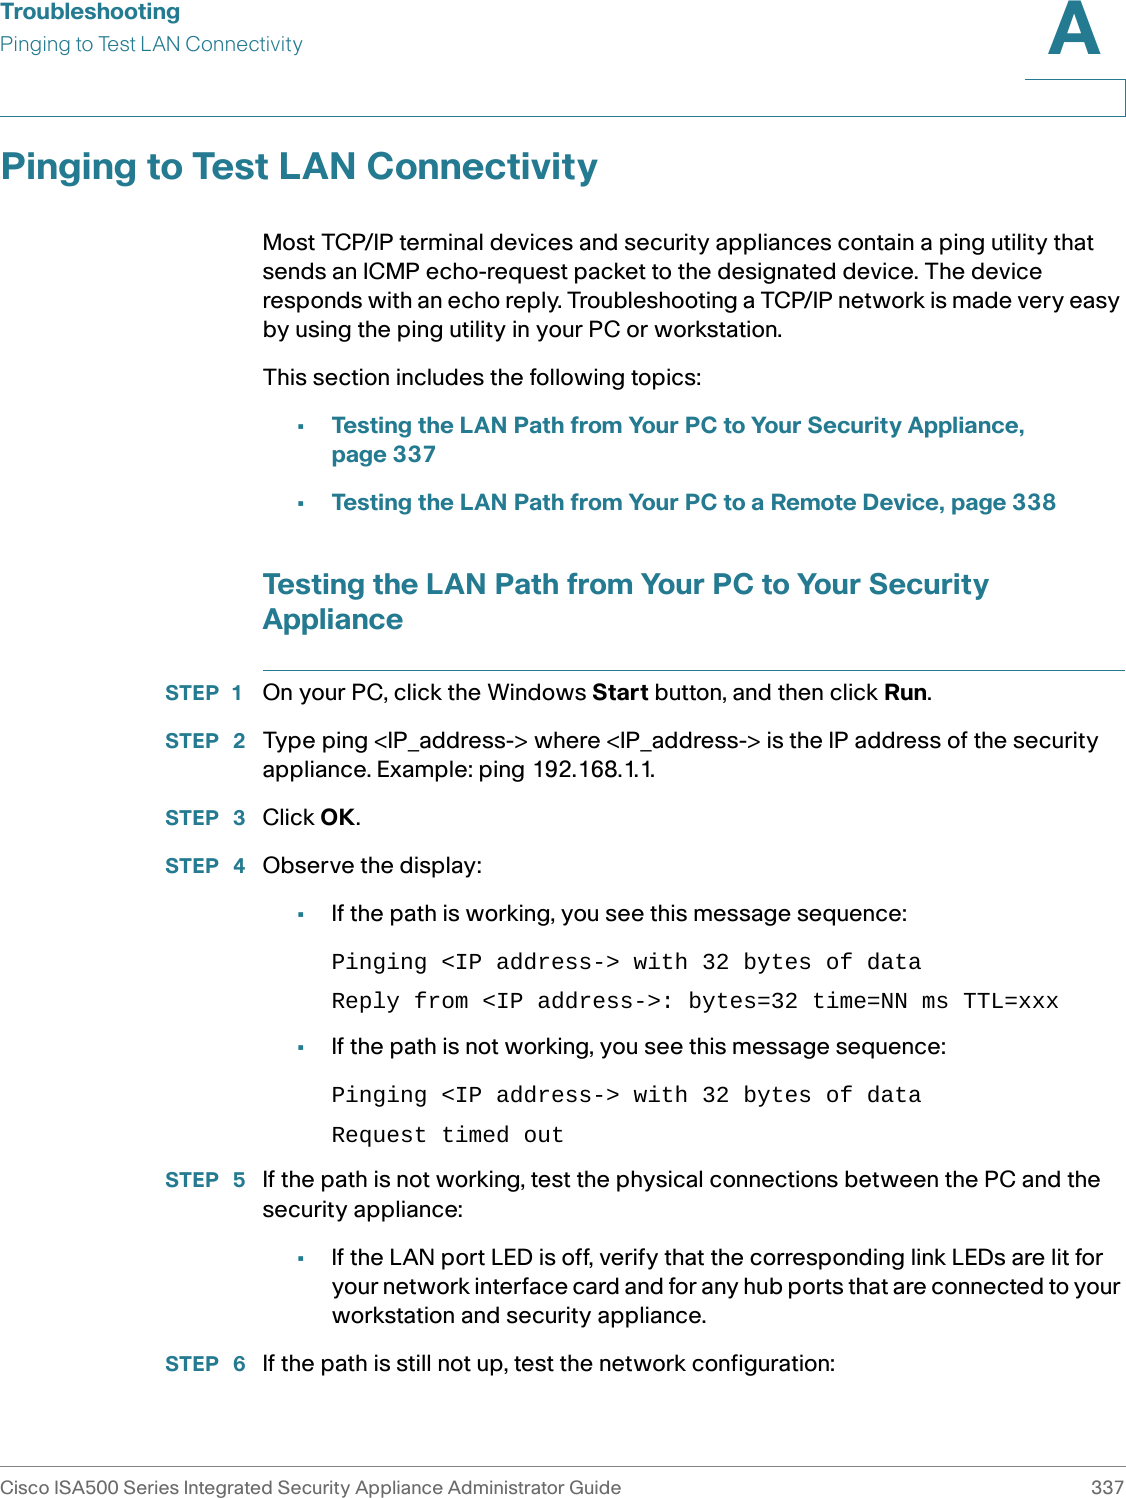 TroubleshootingPinging to Test LAN ConnectivityCisco ISA500 Series Integrated Security Appliance Administrator Guide 337A Pinging to Test LAN ConnectivityMost TCP/IP terminal devices and security appliances contain a ping utility that sends an ICMP echo-request packet to the designated device. The device responds with an echo reply. Troubleshooting a TCP/IP network is made very easy by using the ping utility in your PC or workstation. This section includes the following topics: •Testing the LAN Path from Your PC to Your Security Appliance, page 337•Testing the LAN Path from Your PC to a Remote Device, page 338Testing the LAN Path from Your PC to Your Security ApplianceSTEP 1 On your PC, click the Windows Start button, and then click Run.STEP  2 Type ping &lt;IP_address-&gt; where &lt;IP_address-&gt; is the IP address of the security appliance. Example: ping 192.168.1.1.STEP  3 Click OK.STEP  4 Observe the display:•If the path is working, you see this message sequence:Pinging &lt;IP address-&gt; with 32 bytes of dataReply from &lt;IP address-&gt;: bytes=32 time=NN ms TTL=xxx•If the path is not working, you see this message sequence:Pinging &lt;IP address-&gt; with 32 bytes of dataRequest timed outSTEP  5 If the path is not working, test the physical connections between the PC and the security appliance:•If the LAN port LED is off, verify that the corresponding link LEDs are lit for your network interface card and for any hub ports that are connected to your workstation and security appliance.STEP  6 If the path is still not up, test the network configuration: